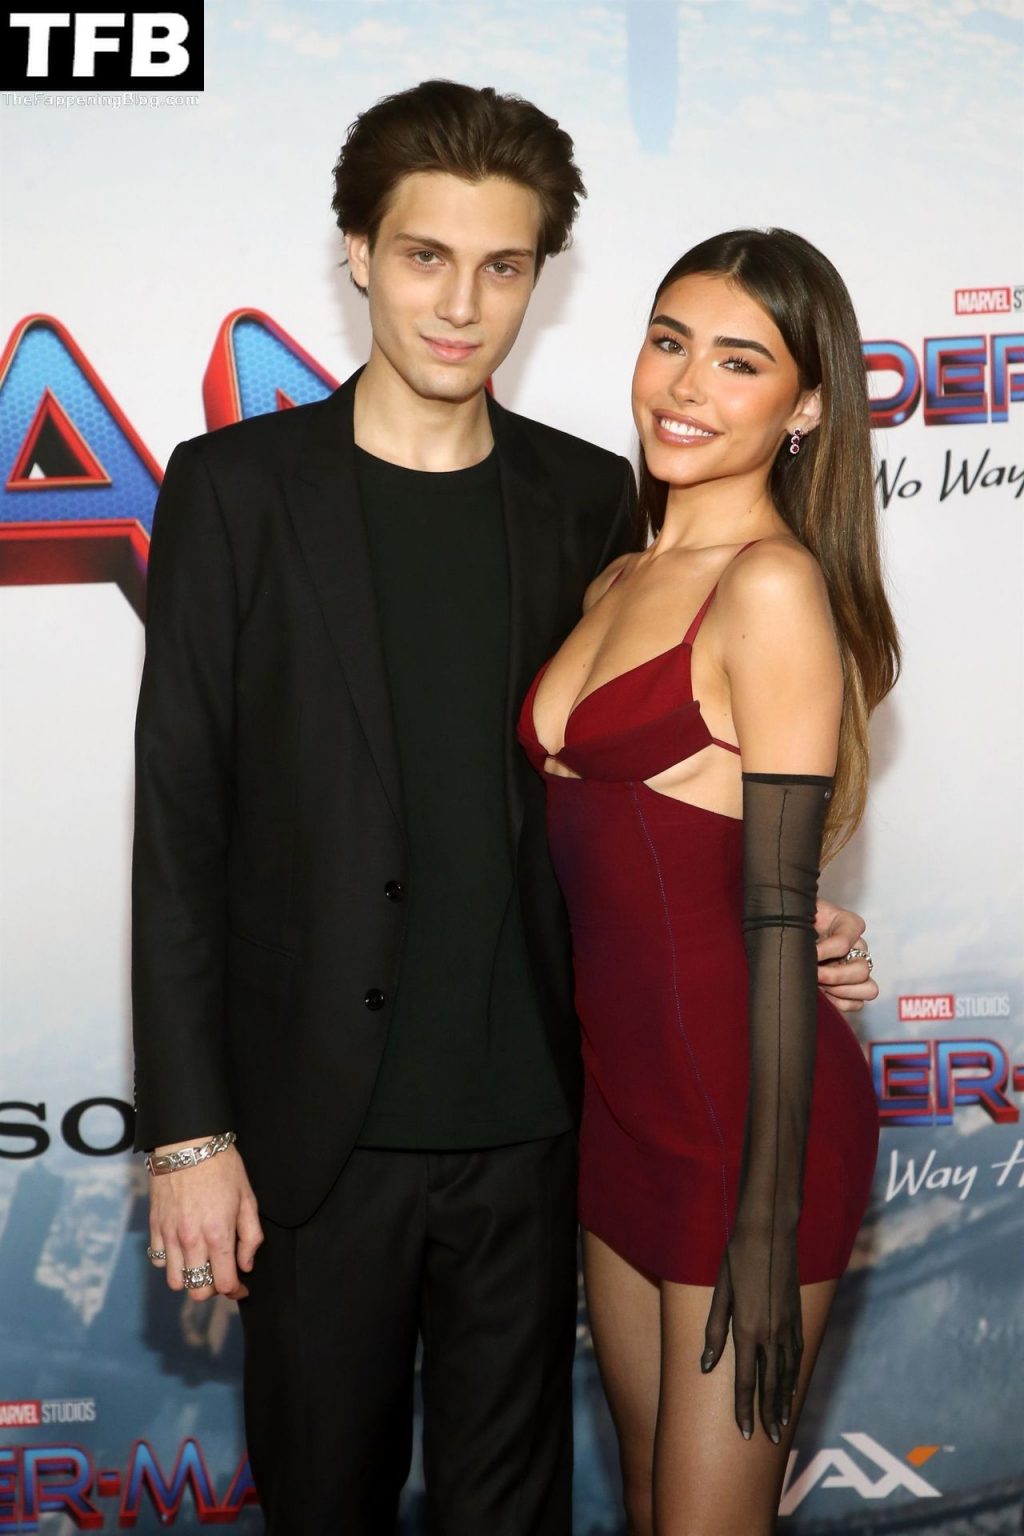 Madison Beer Flaunts Her Slender Figure at the LA Premiere of “Spider-Man: No Way Home” (4 Photos + Video)